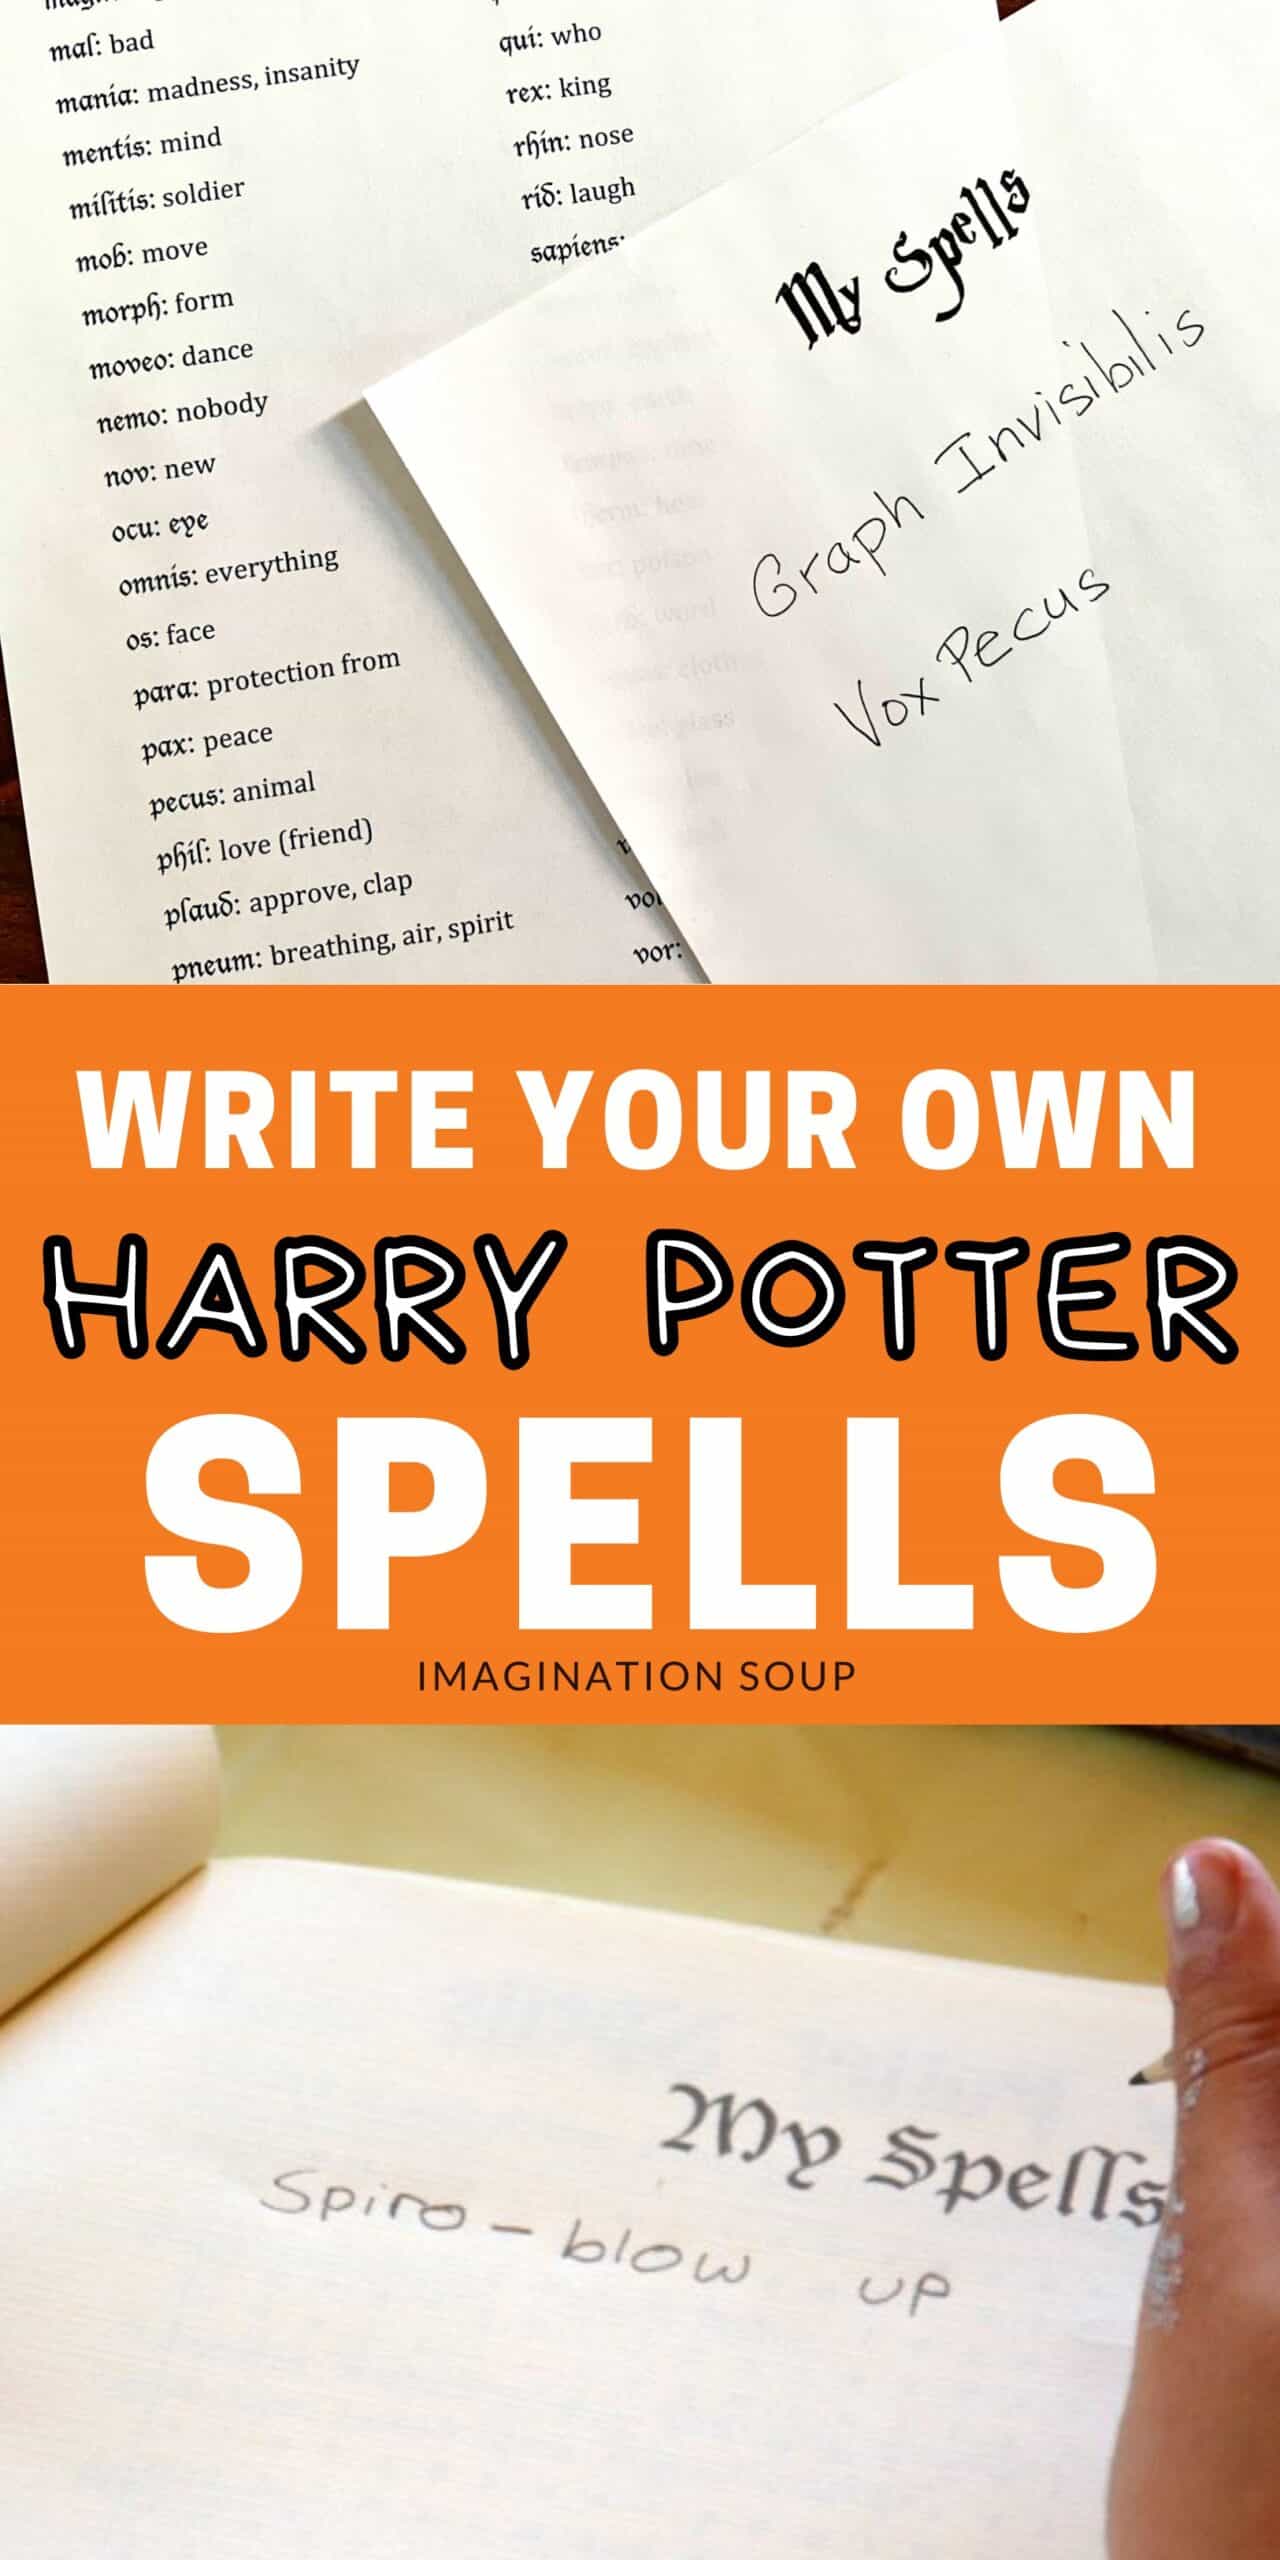 write your own Harry Potter spells